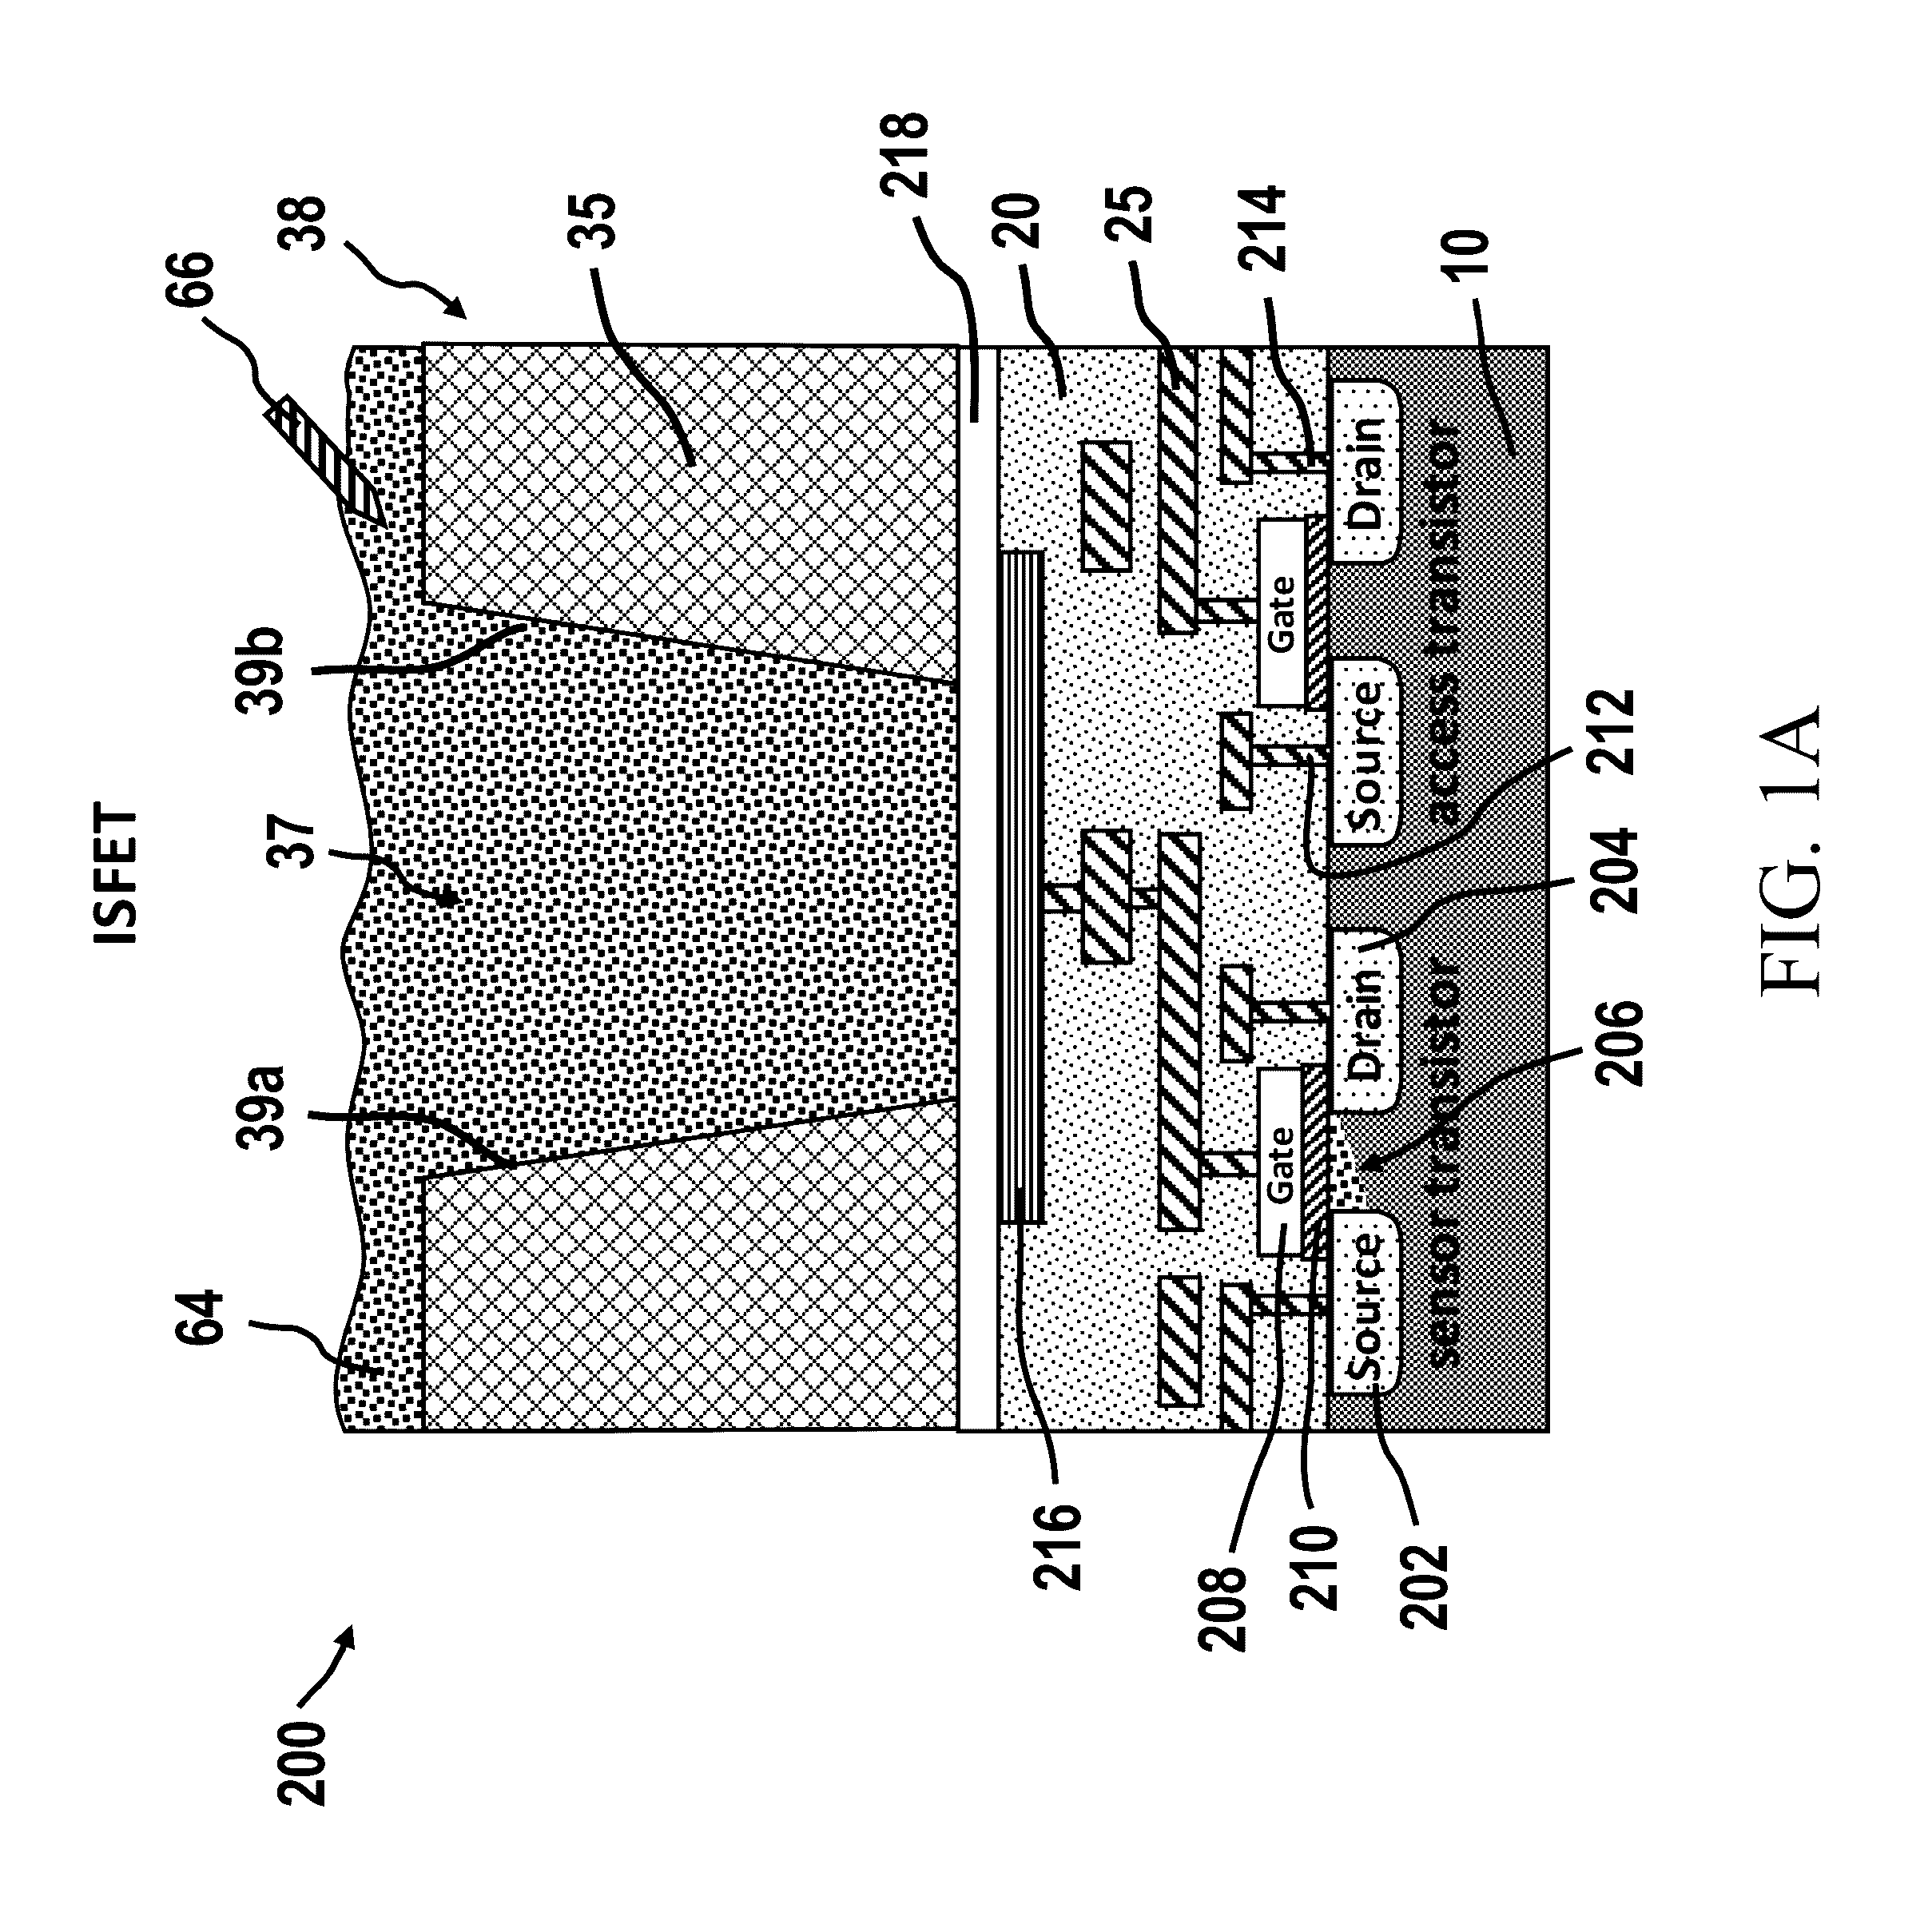 Chemically-sensitive field effect transistors, systems, and methods for manufacturing and using the same